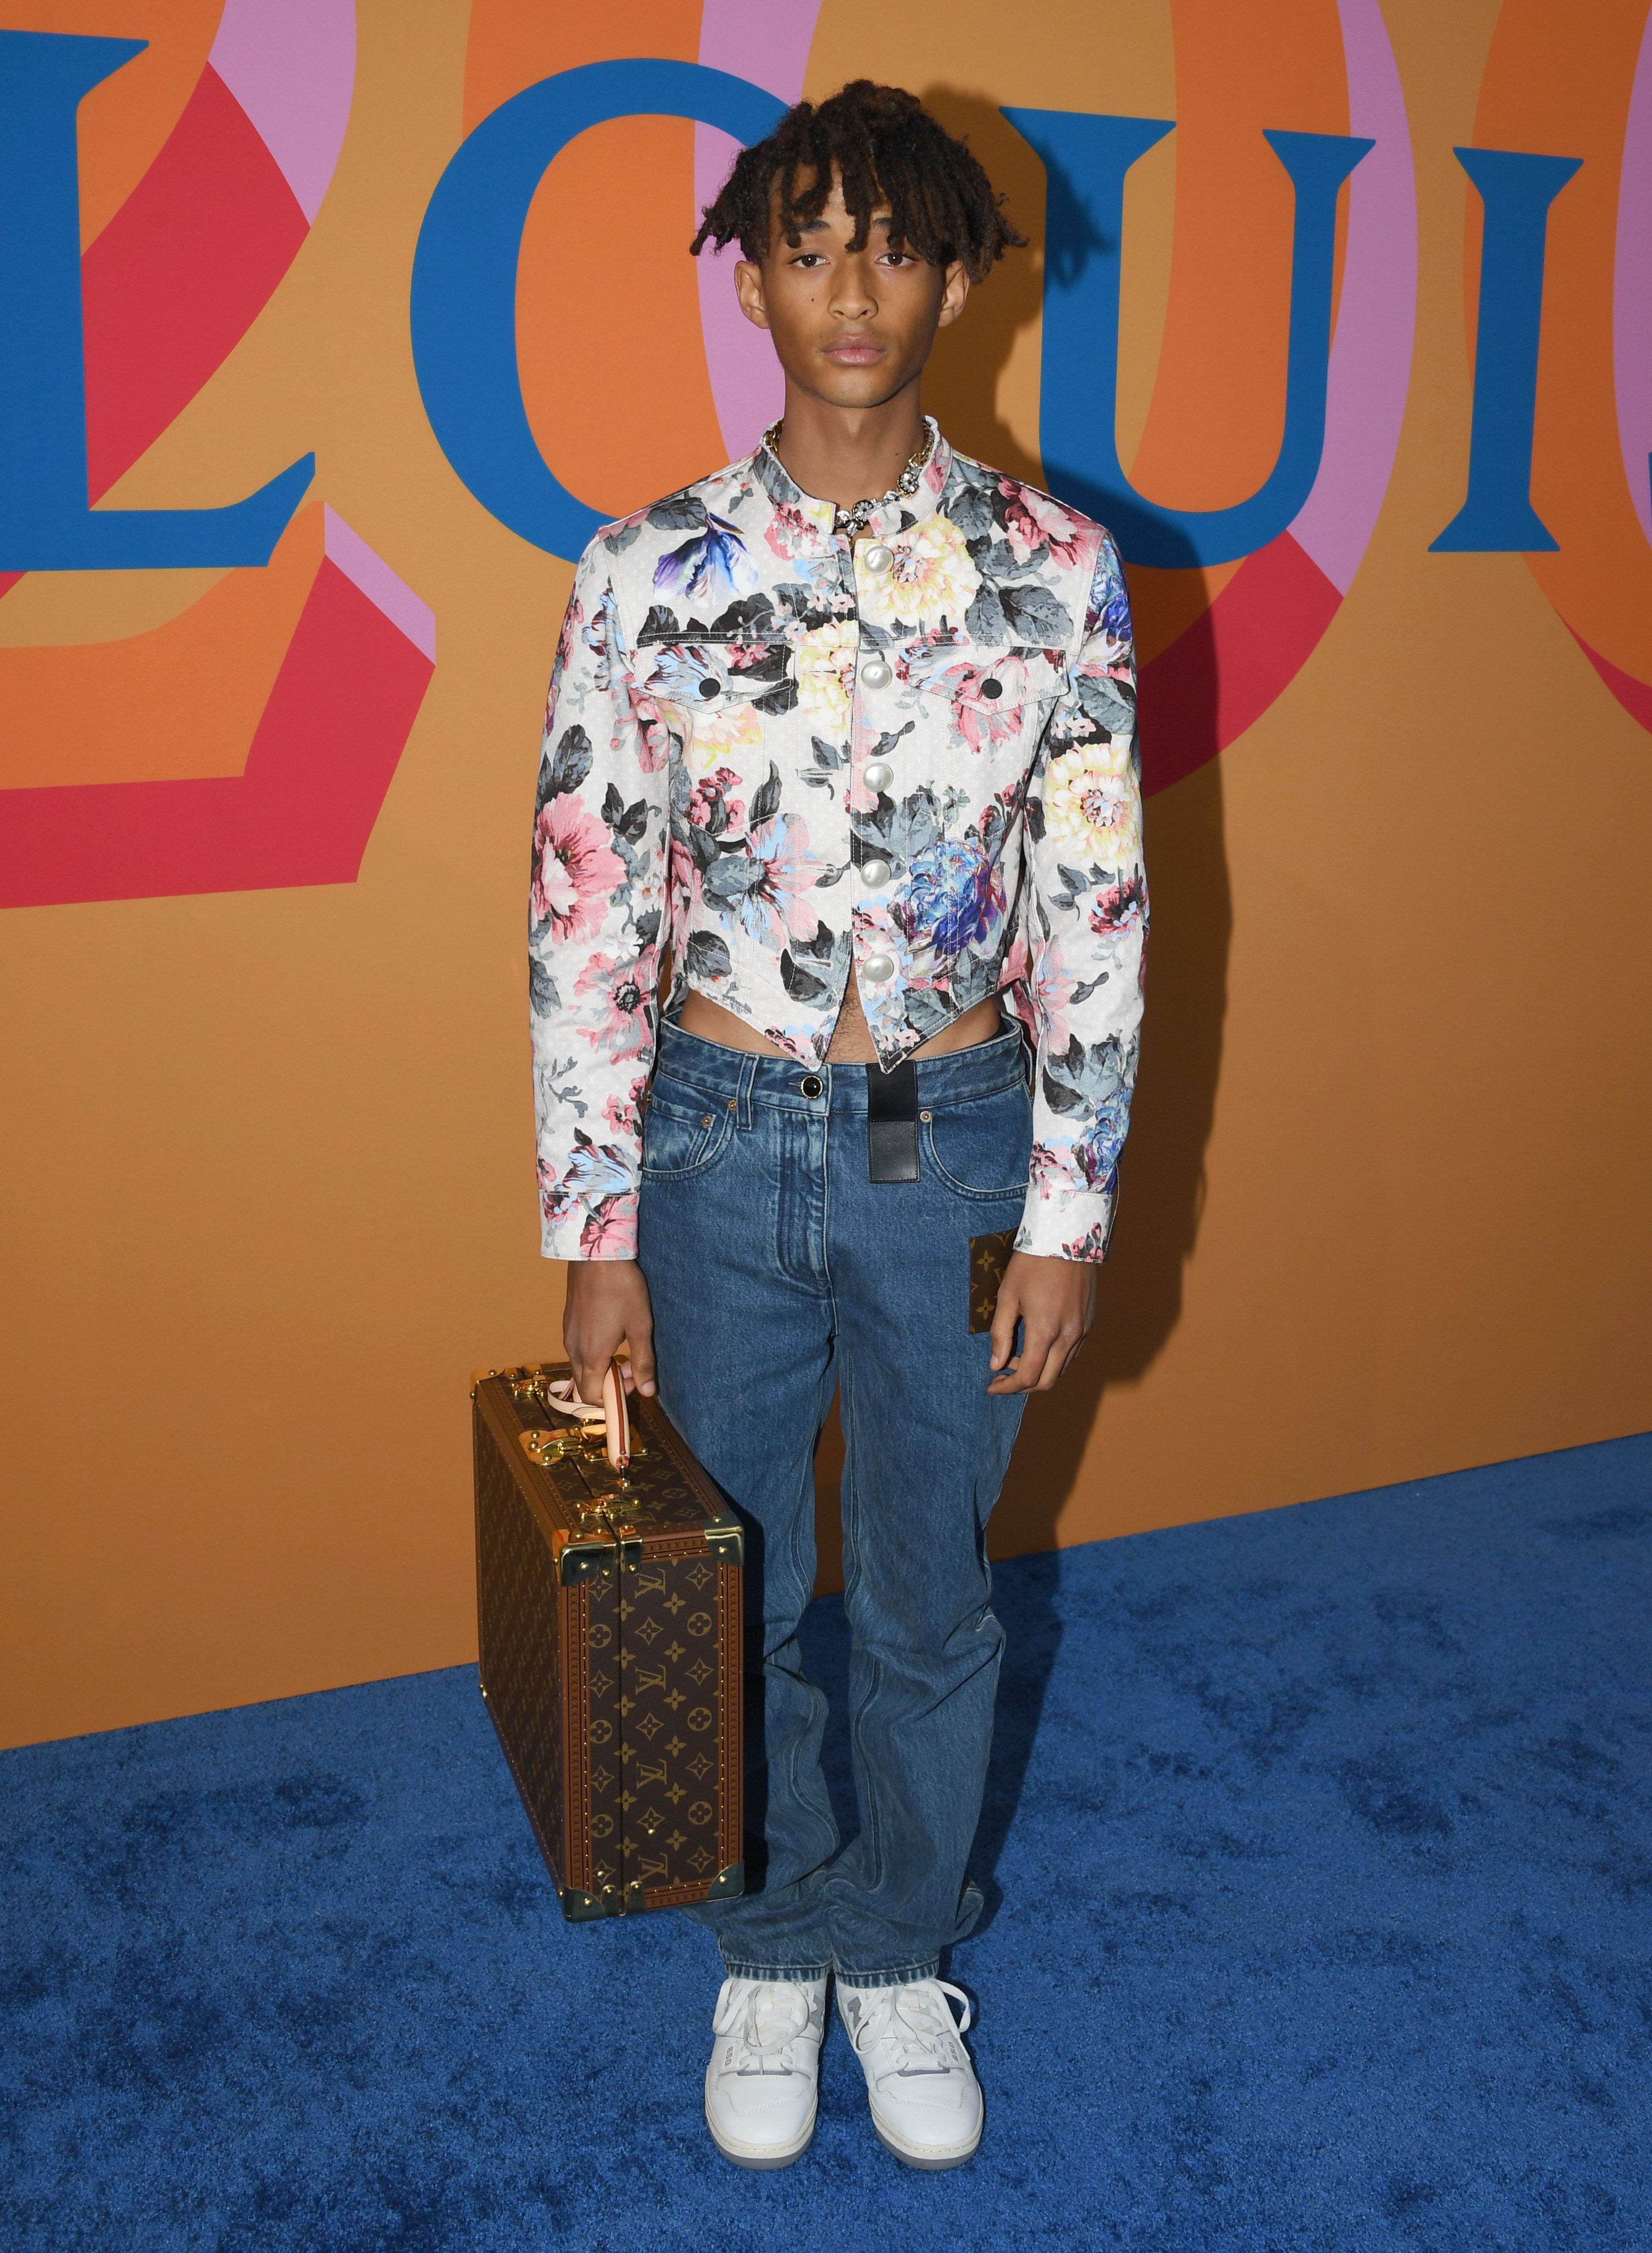 Jaden in jeans and a flowery top